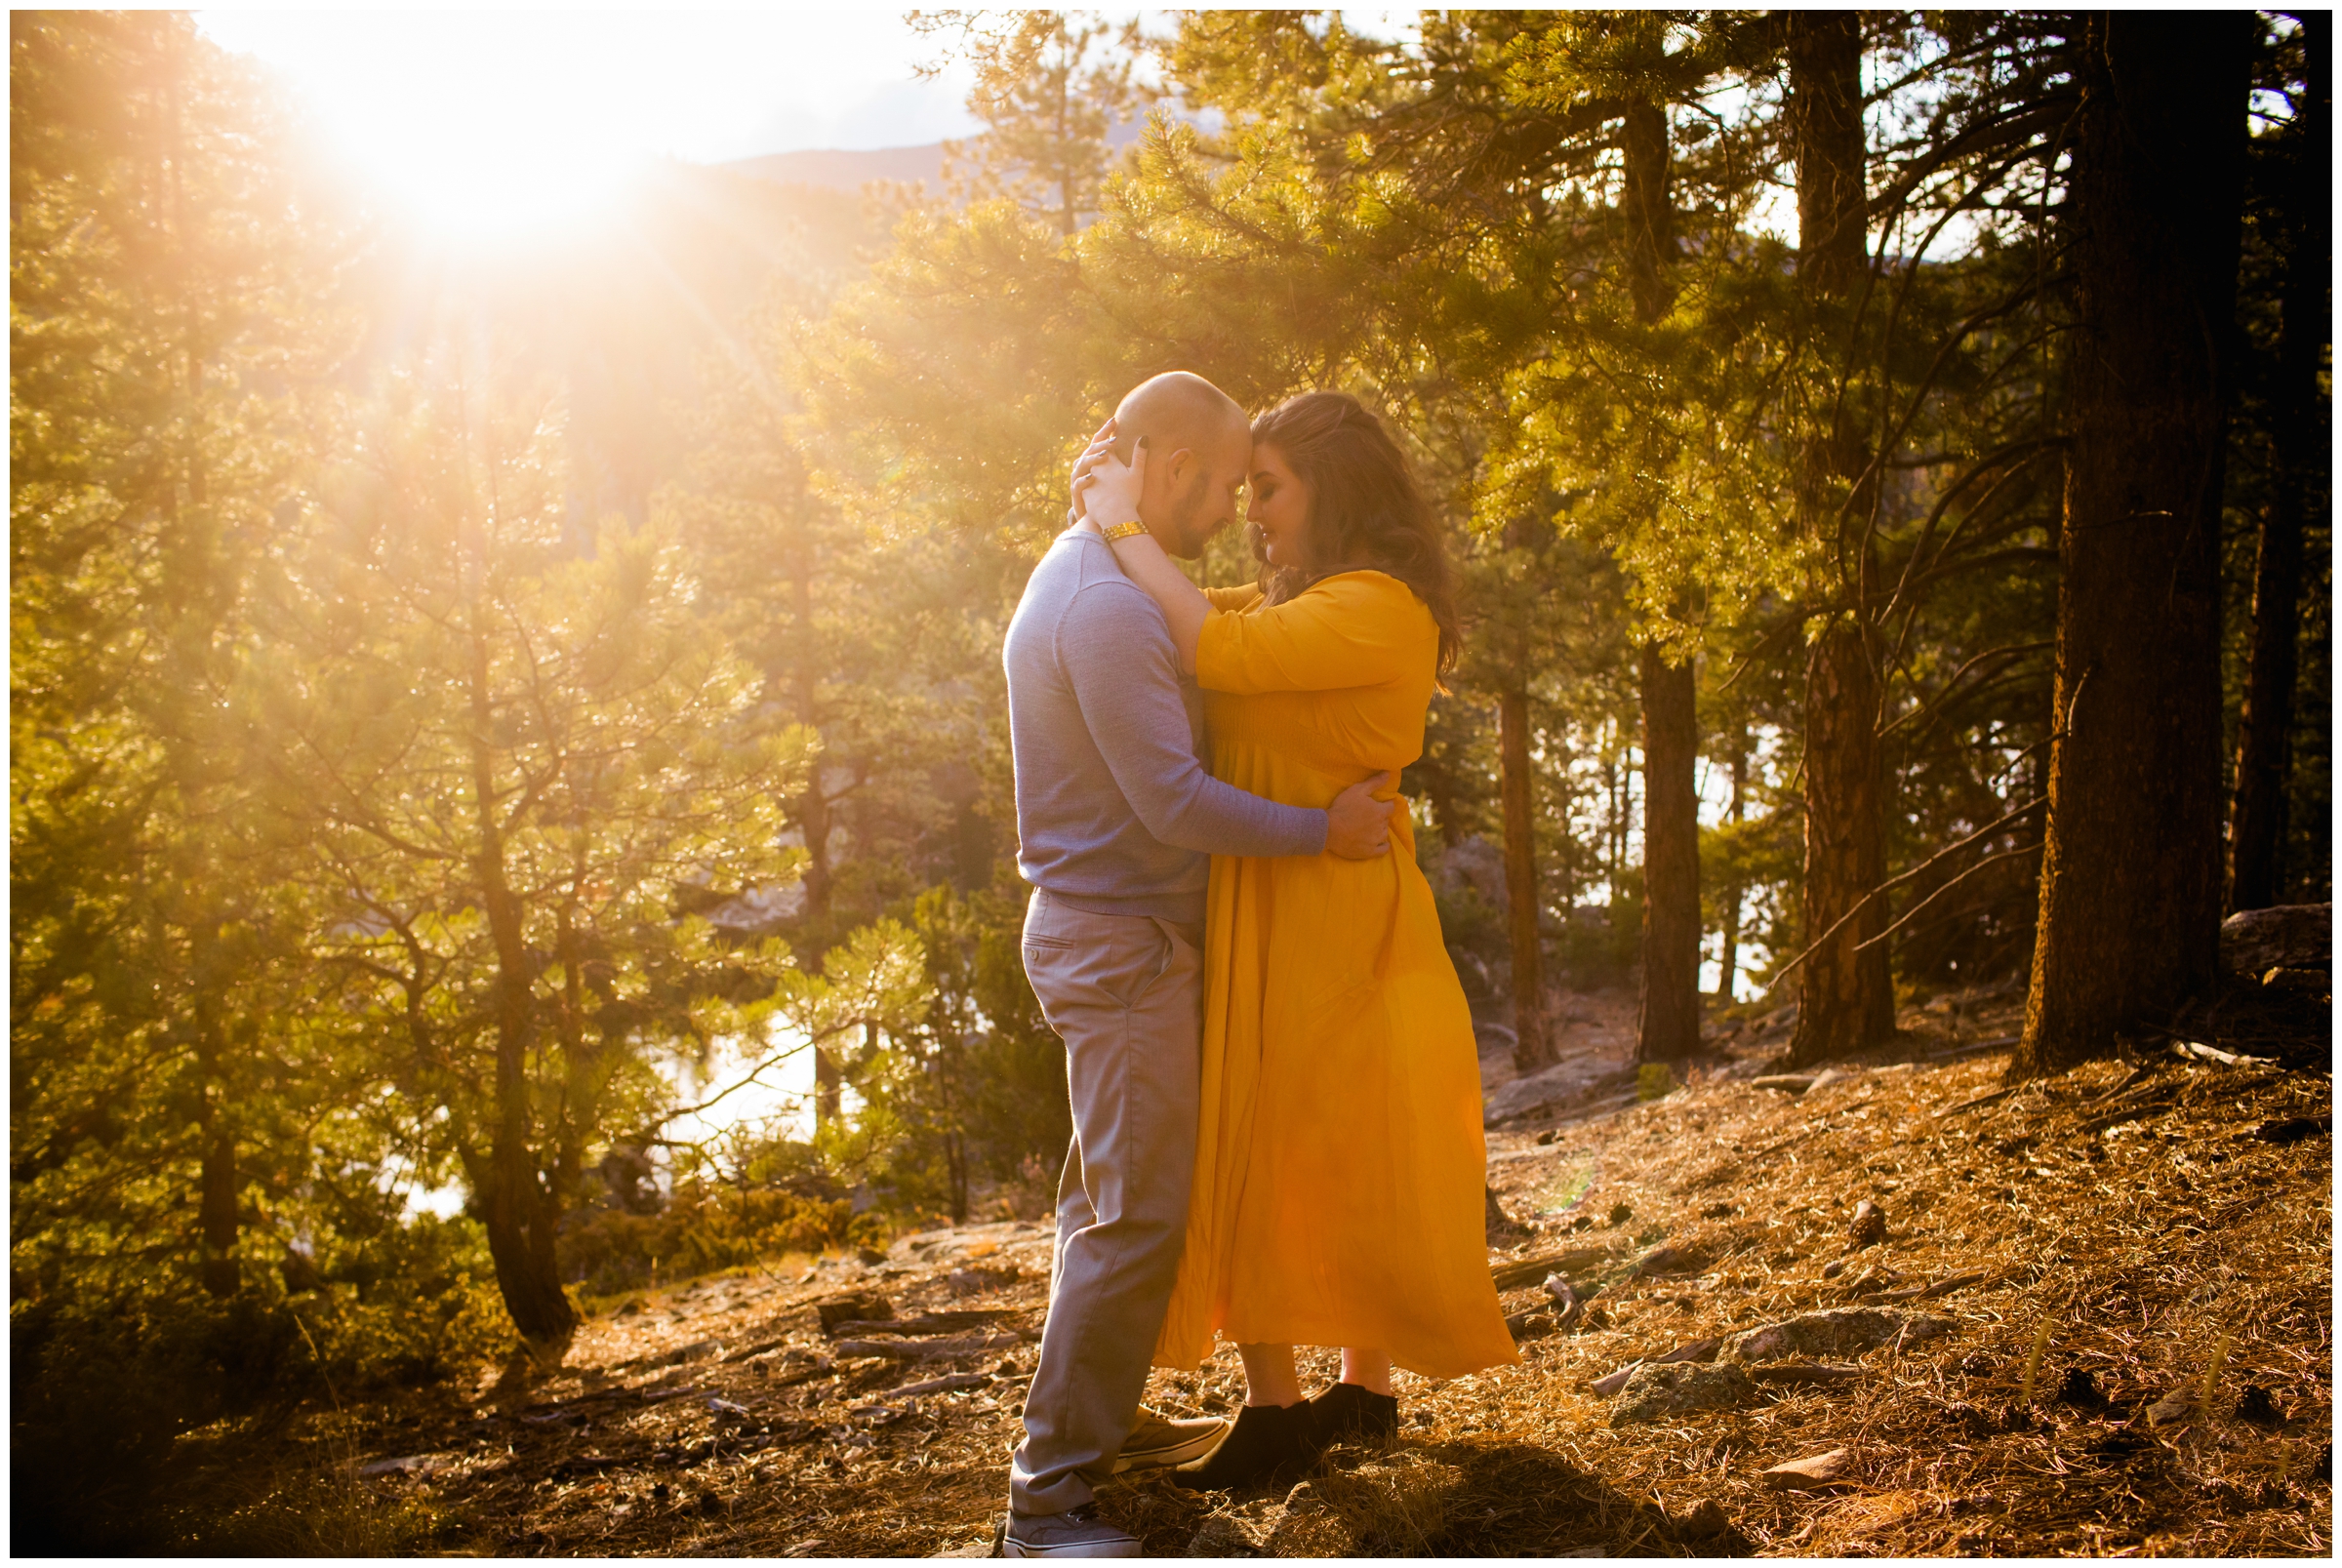 sunny forest couple’s portraits in CO mountains 